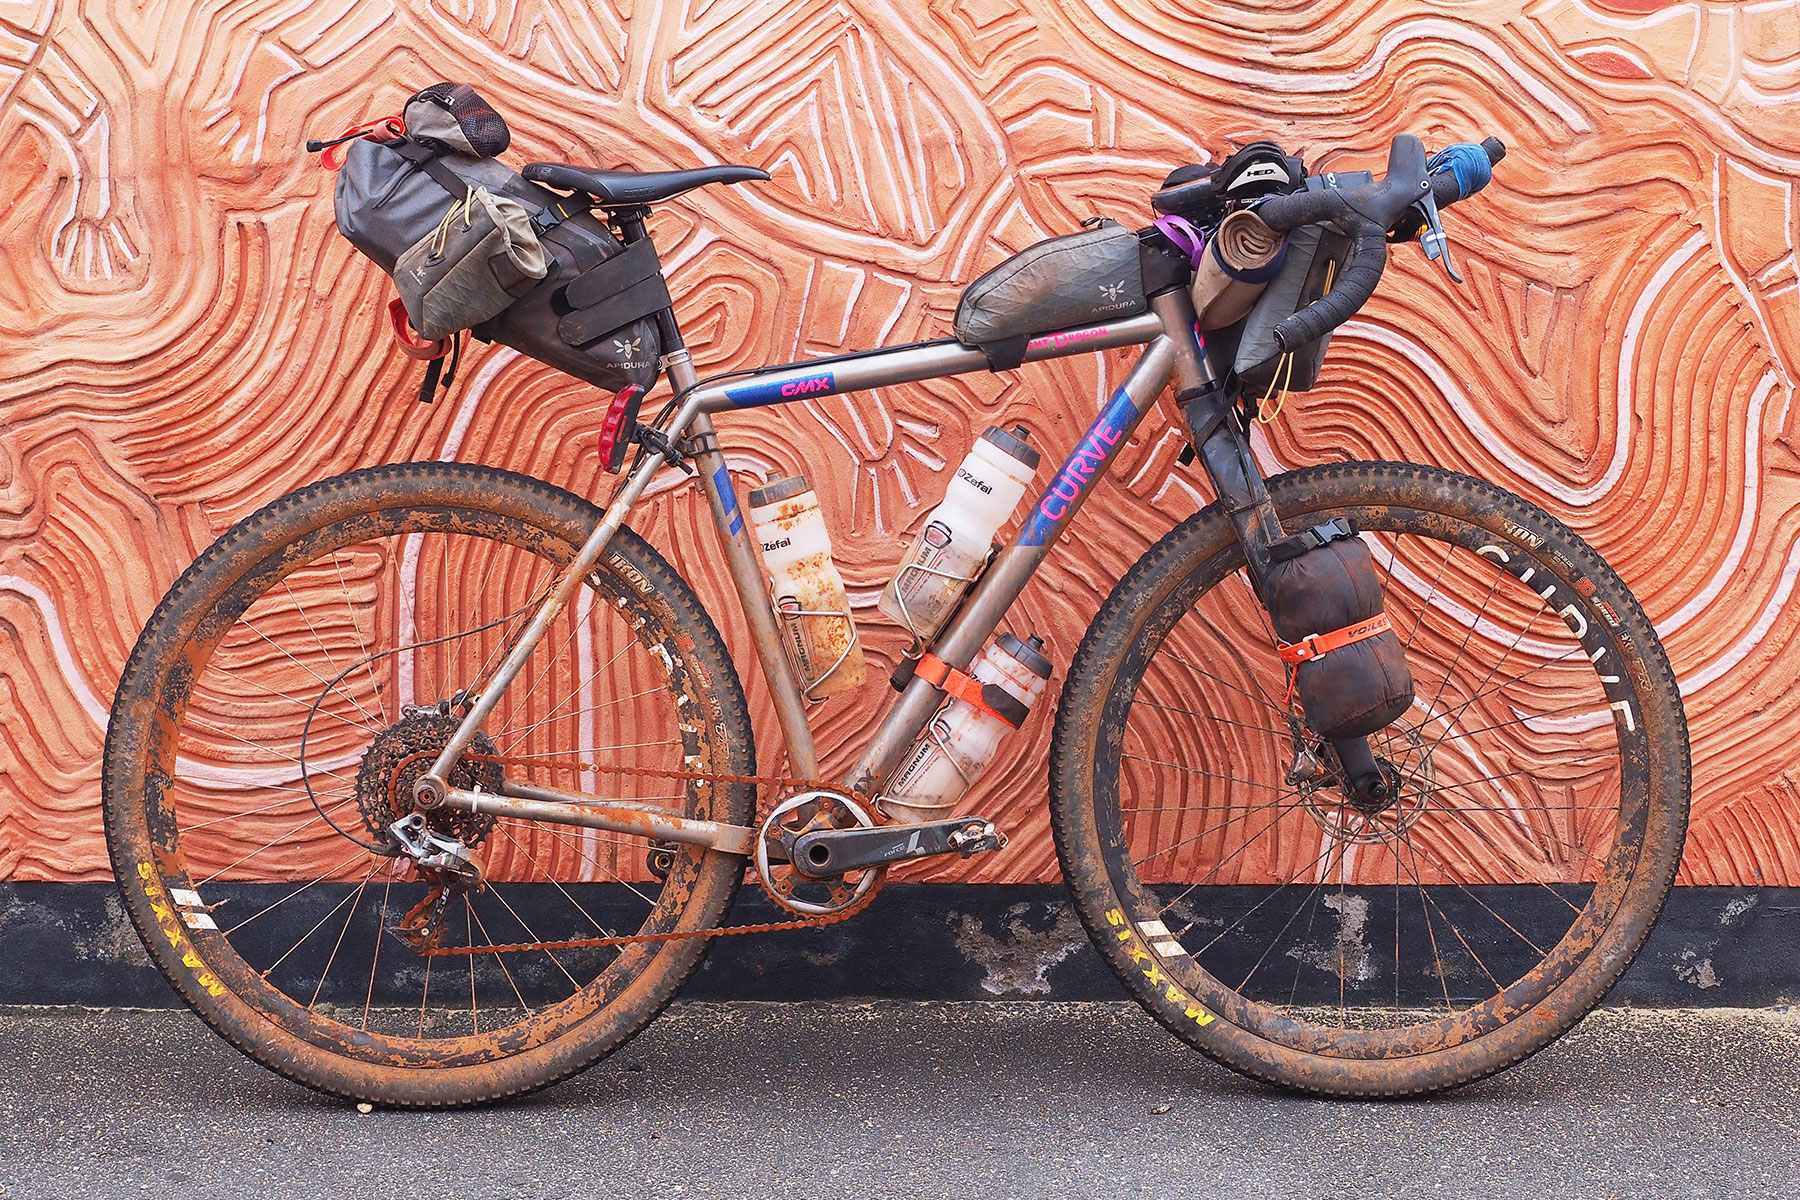 Jesse Carlsson's Race to the Rock Curve GMX Bikepacking Rig, Video